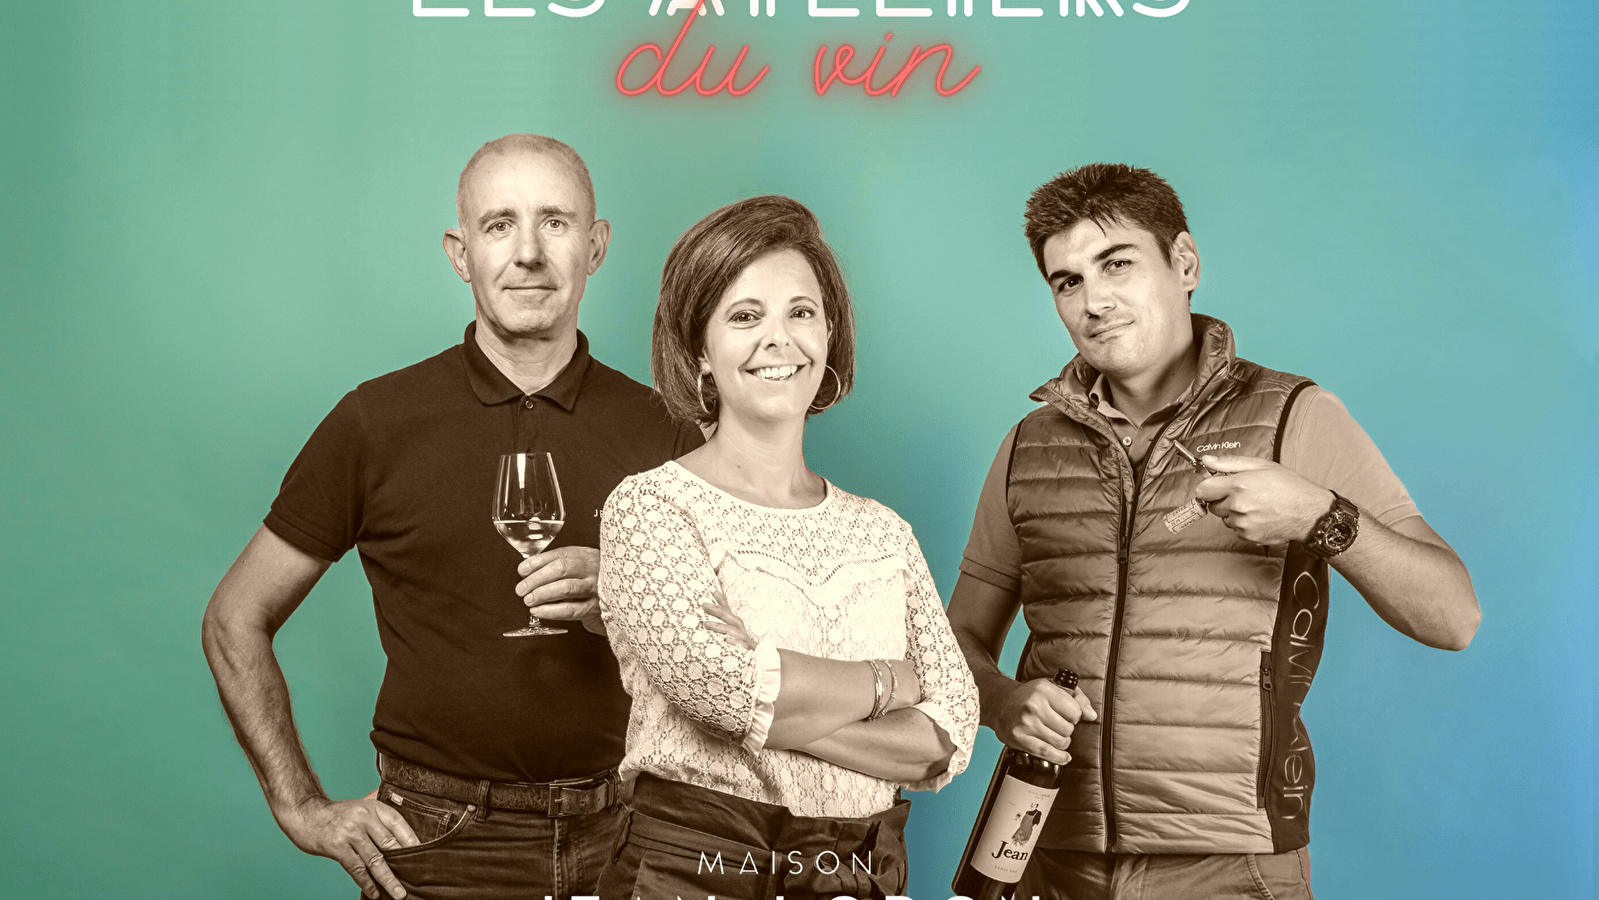 Les Ateliers du Vin - When wines enhance food, discover the most beautiful combinations of flavours and aromas